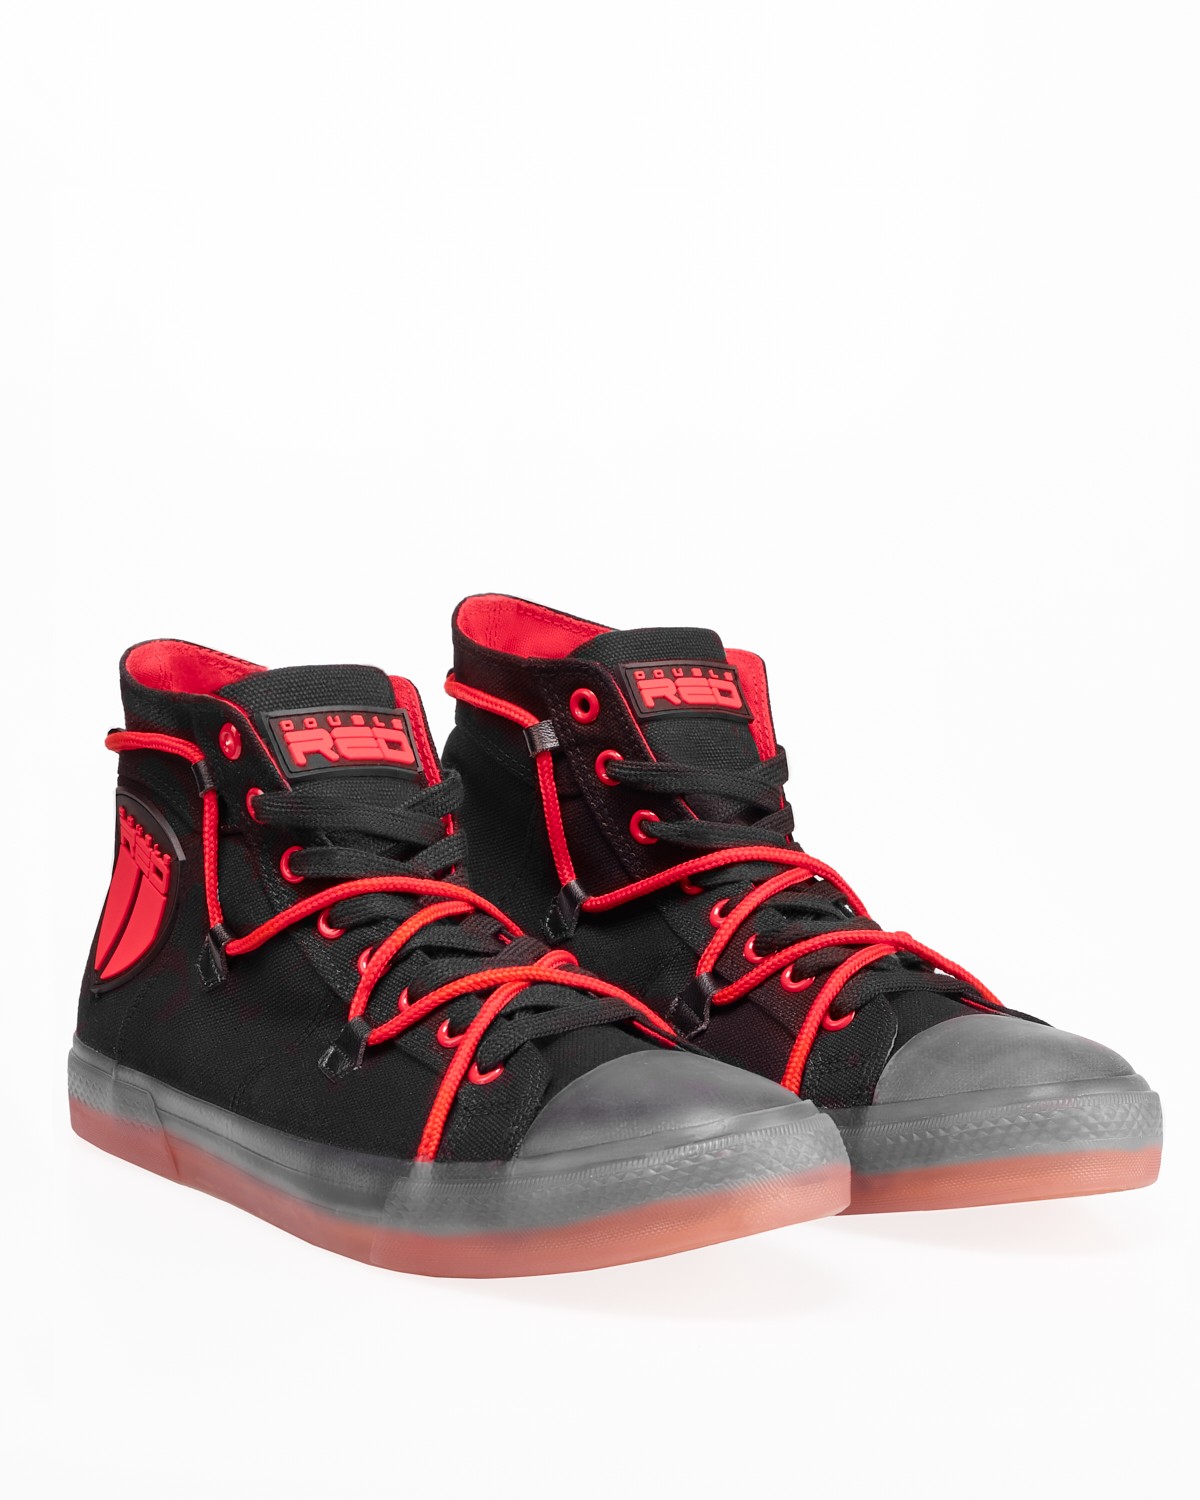 Boty Double Red SPIDEX CANVAS Shoes Black/Red Velikost: 44